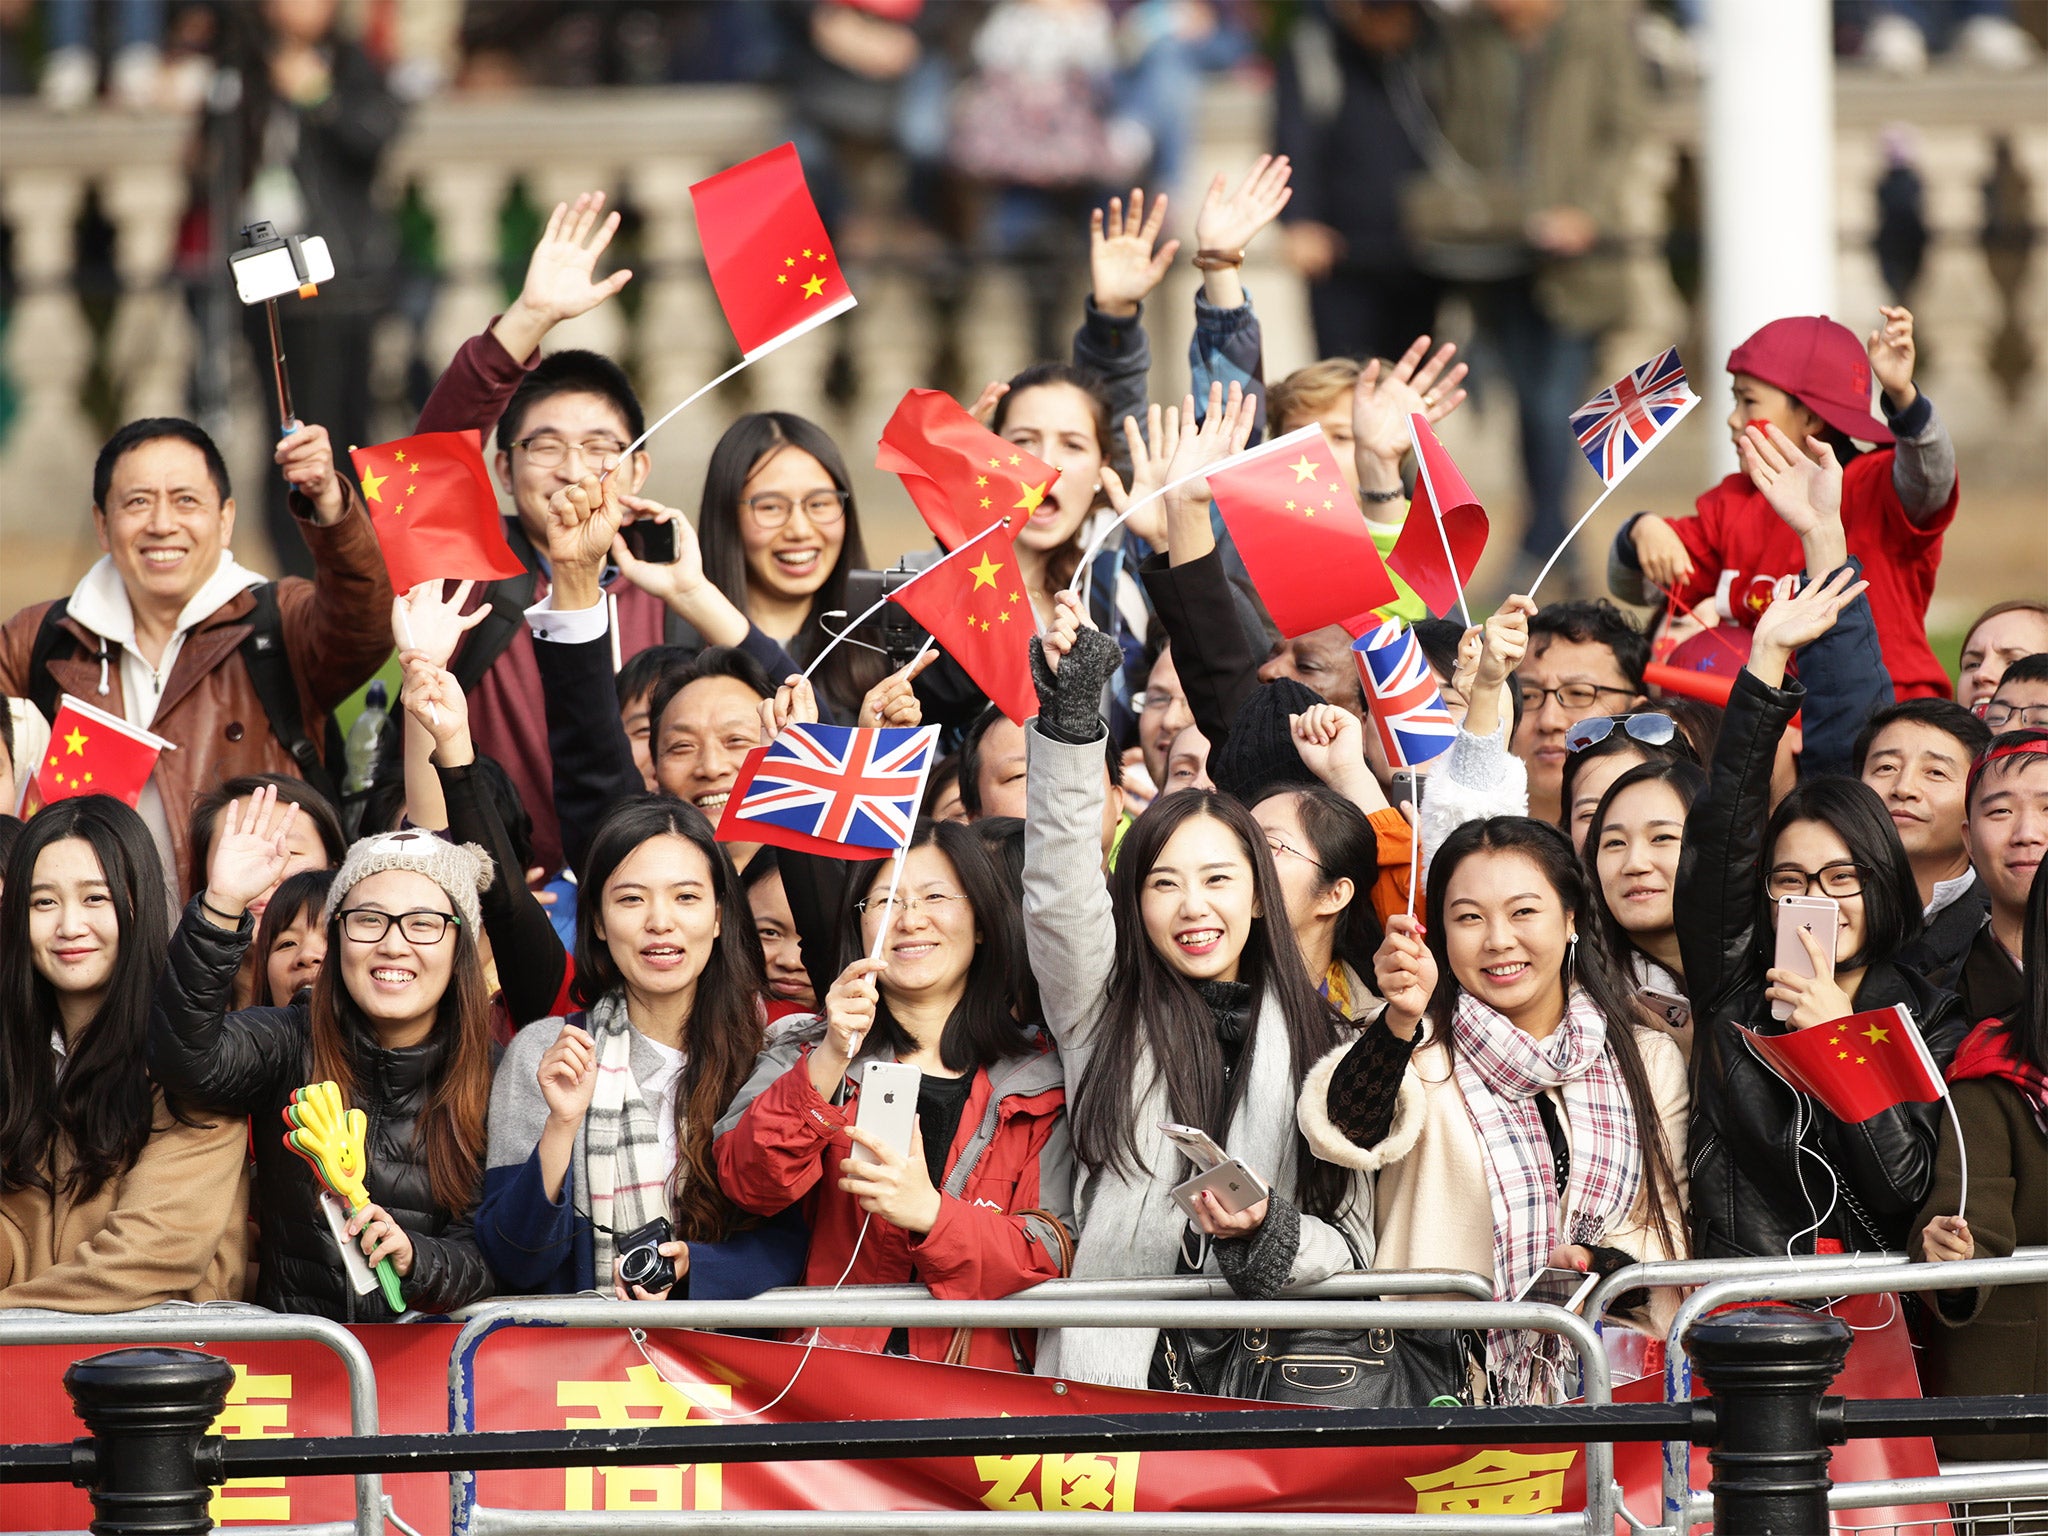 Spectators eagerly wait for the Queen and President Xi Jinping to pass along The Mall (Getty)